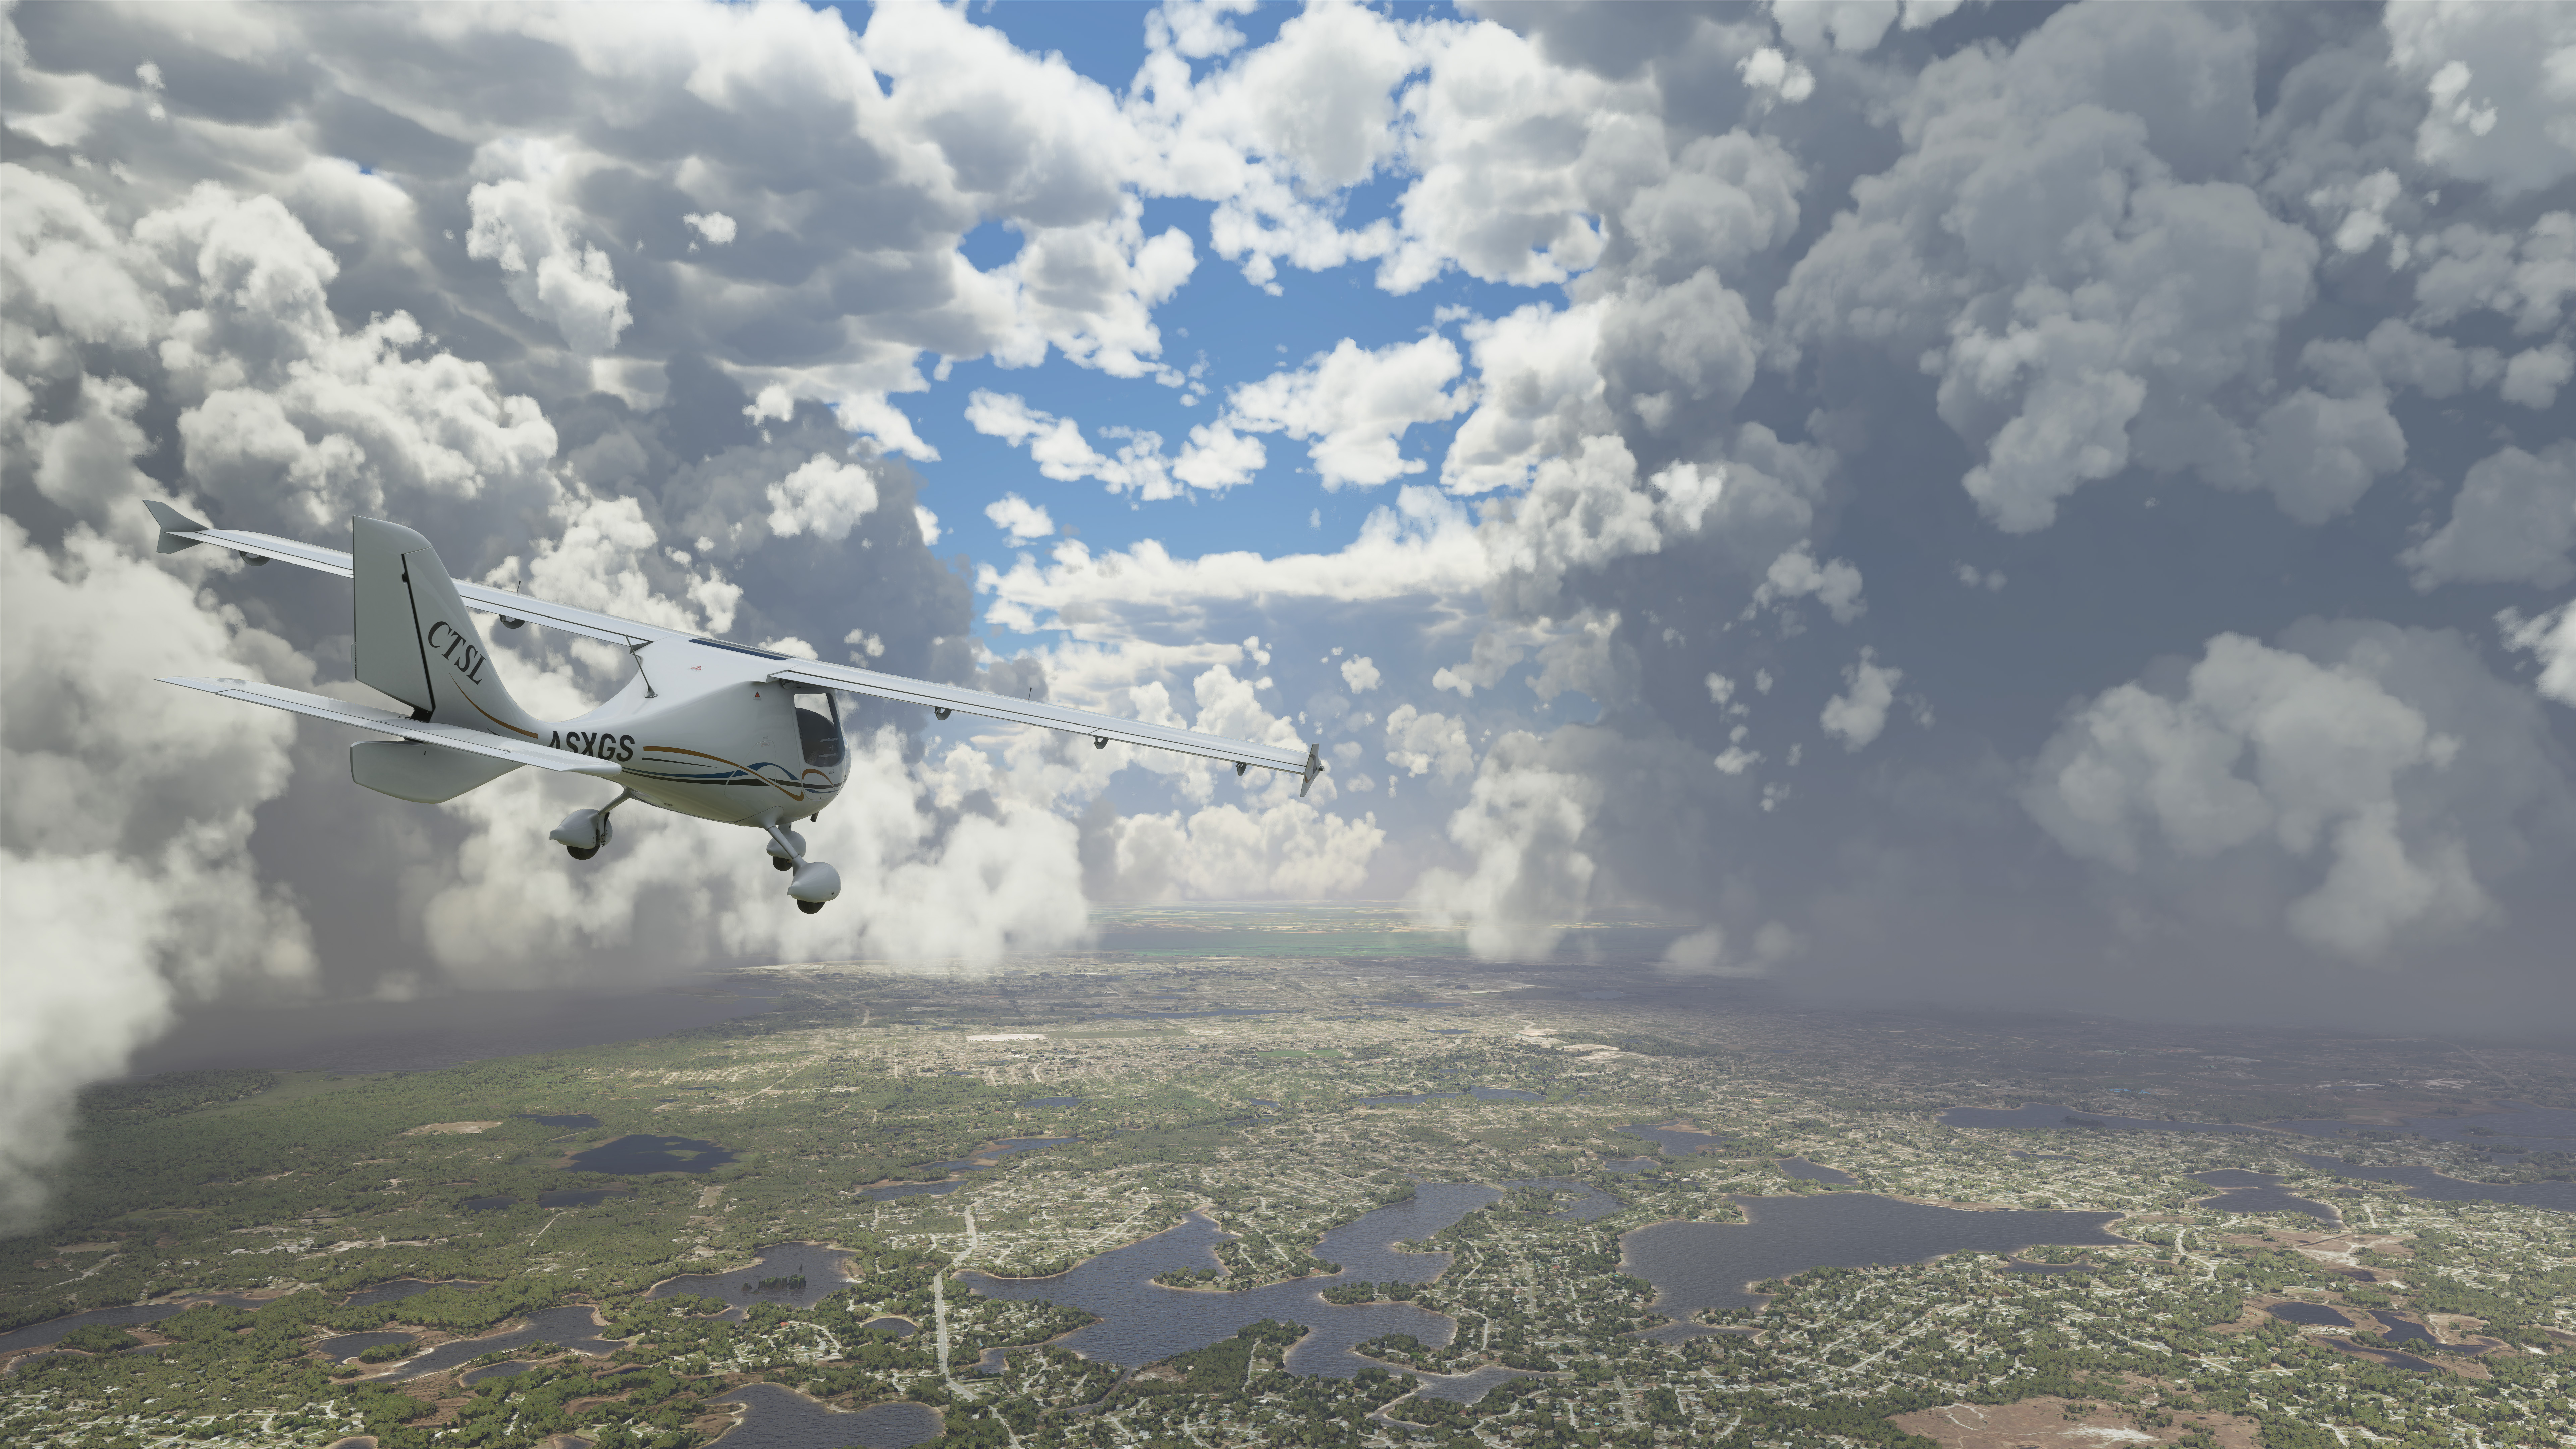 a Cessna flies through partly cloudy skies with a green tapestry beneath it in Microsoft Flight Simulator